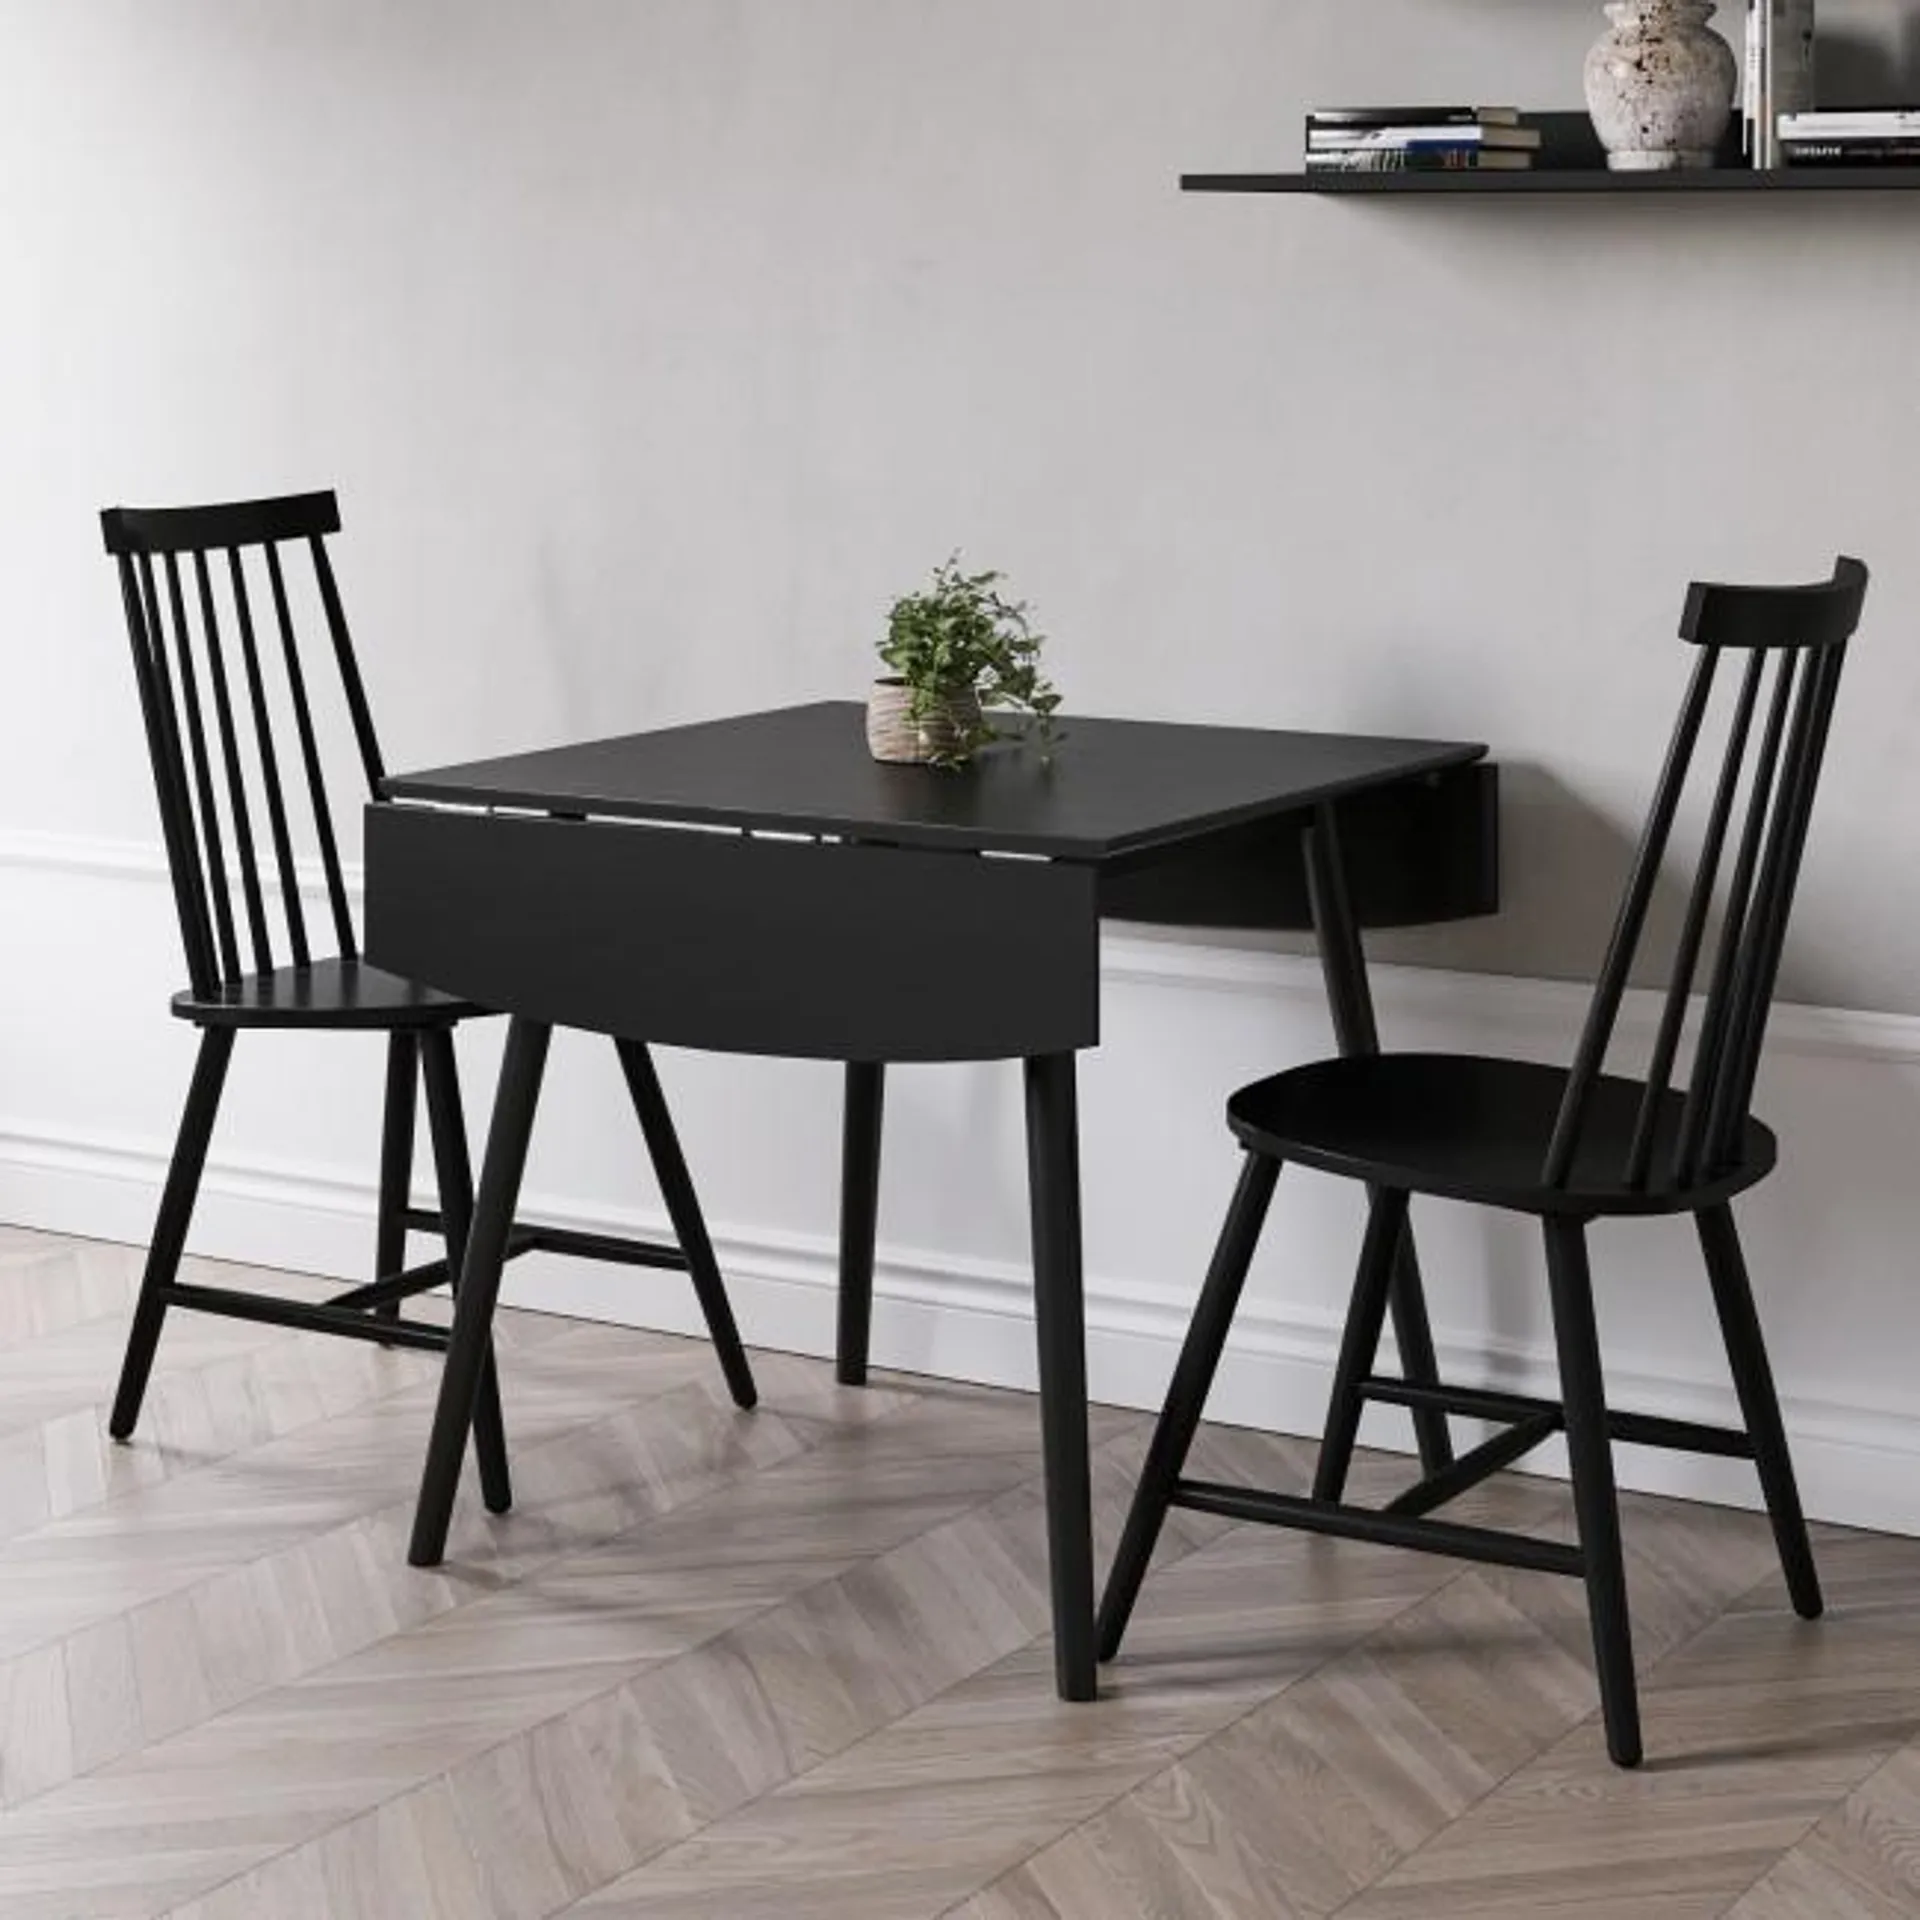 Black Drop Leaf Dining Table with 2 Black Spindle Dining Chairs- Olsen